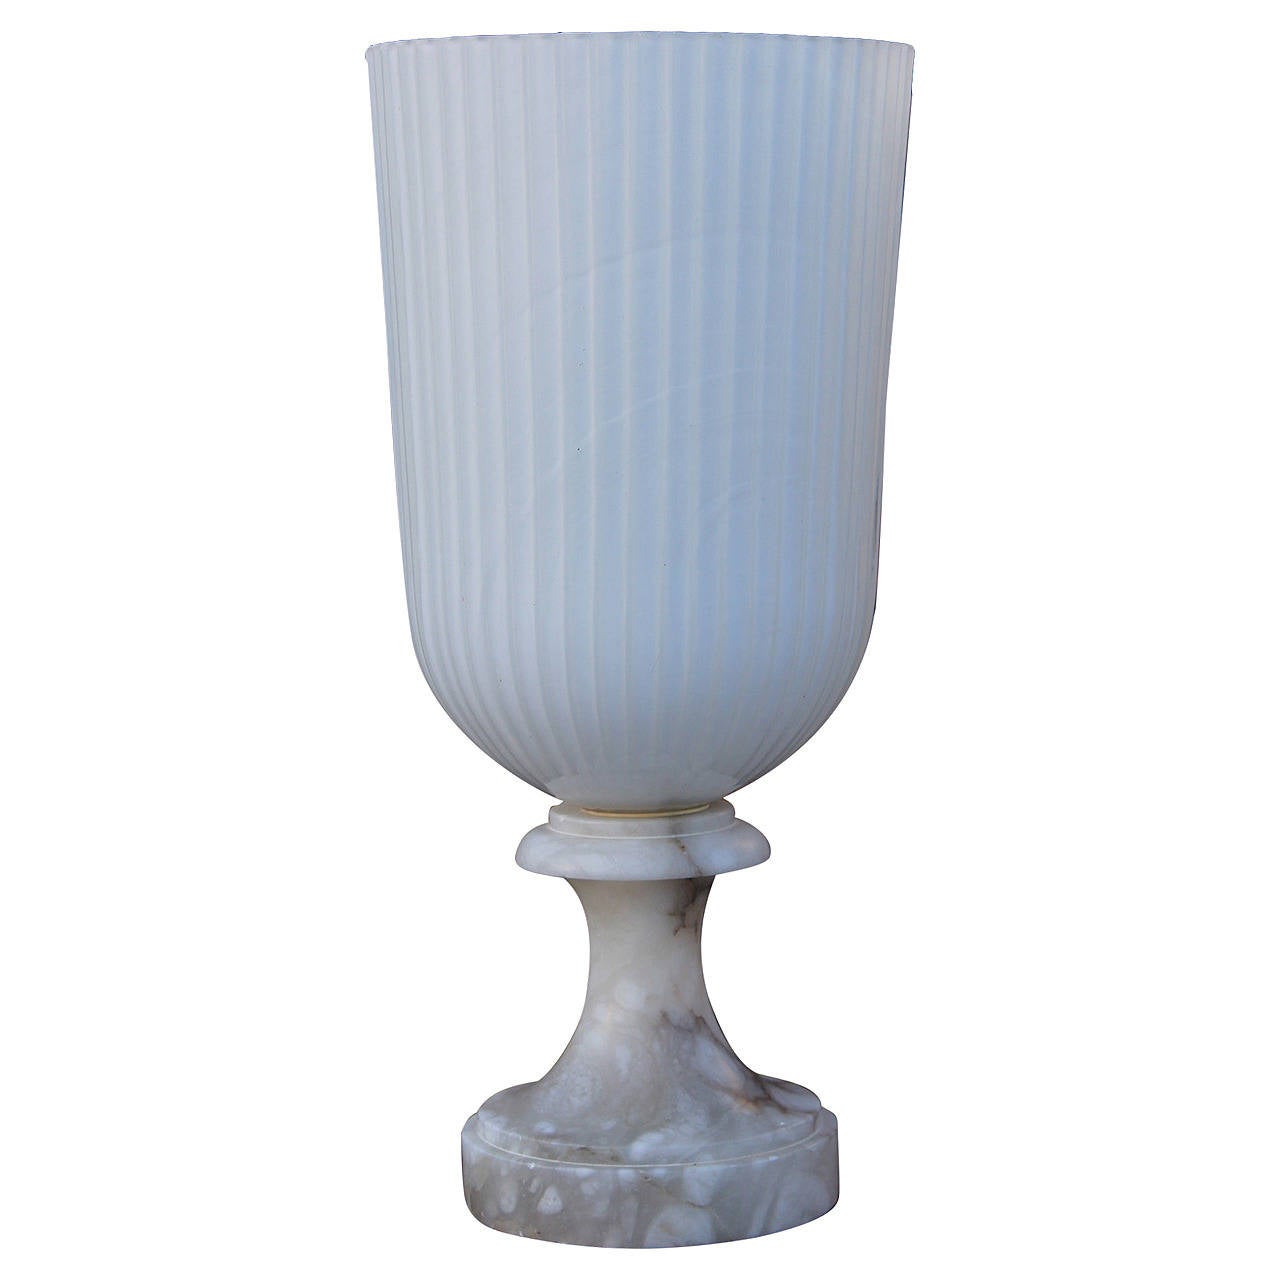 Italian Neoclassical Marble and Glass Lamp by Sarreid For Sale